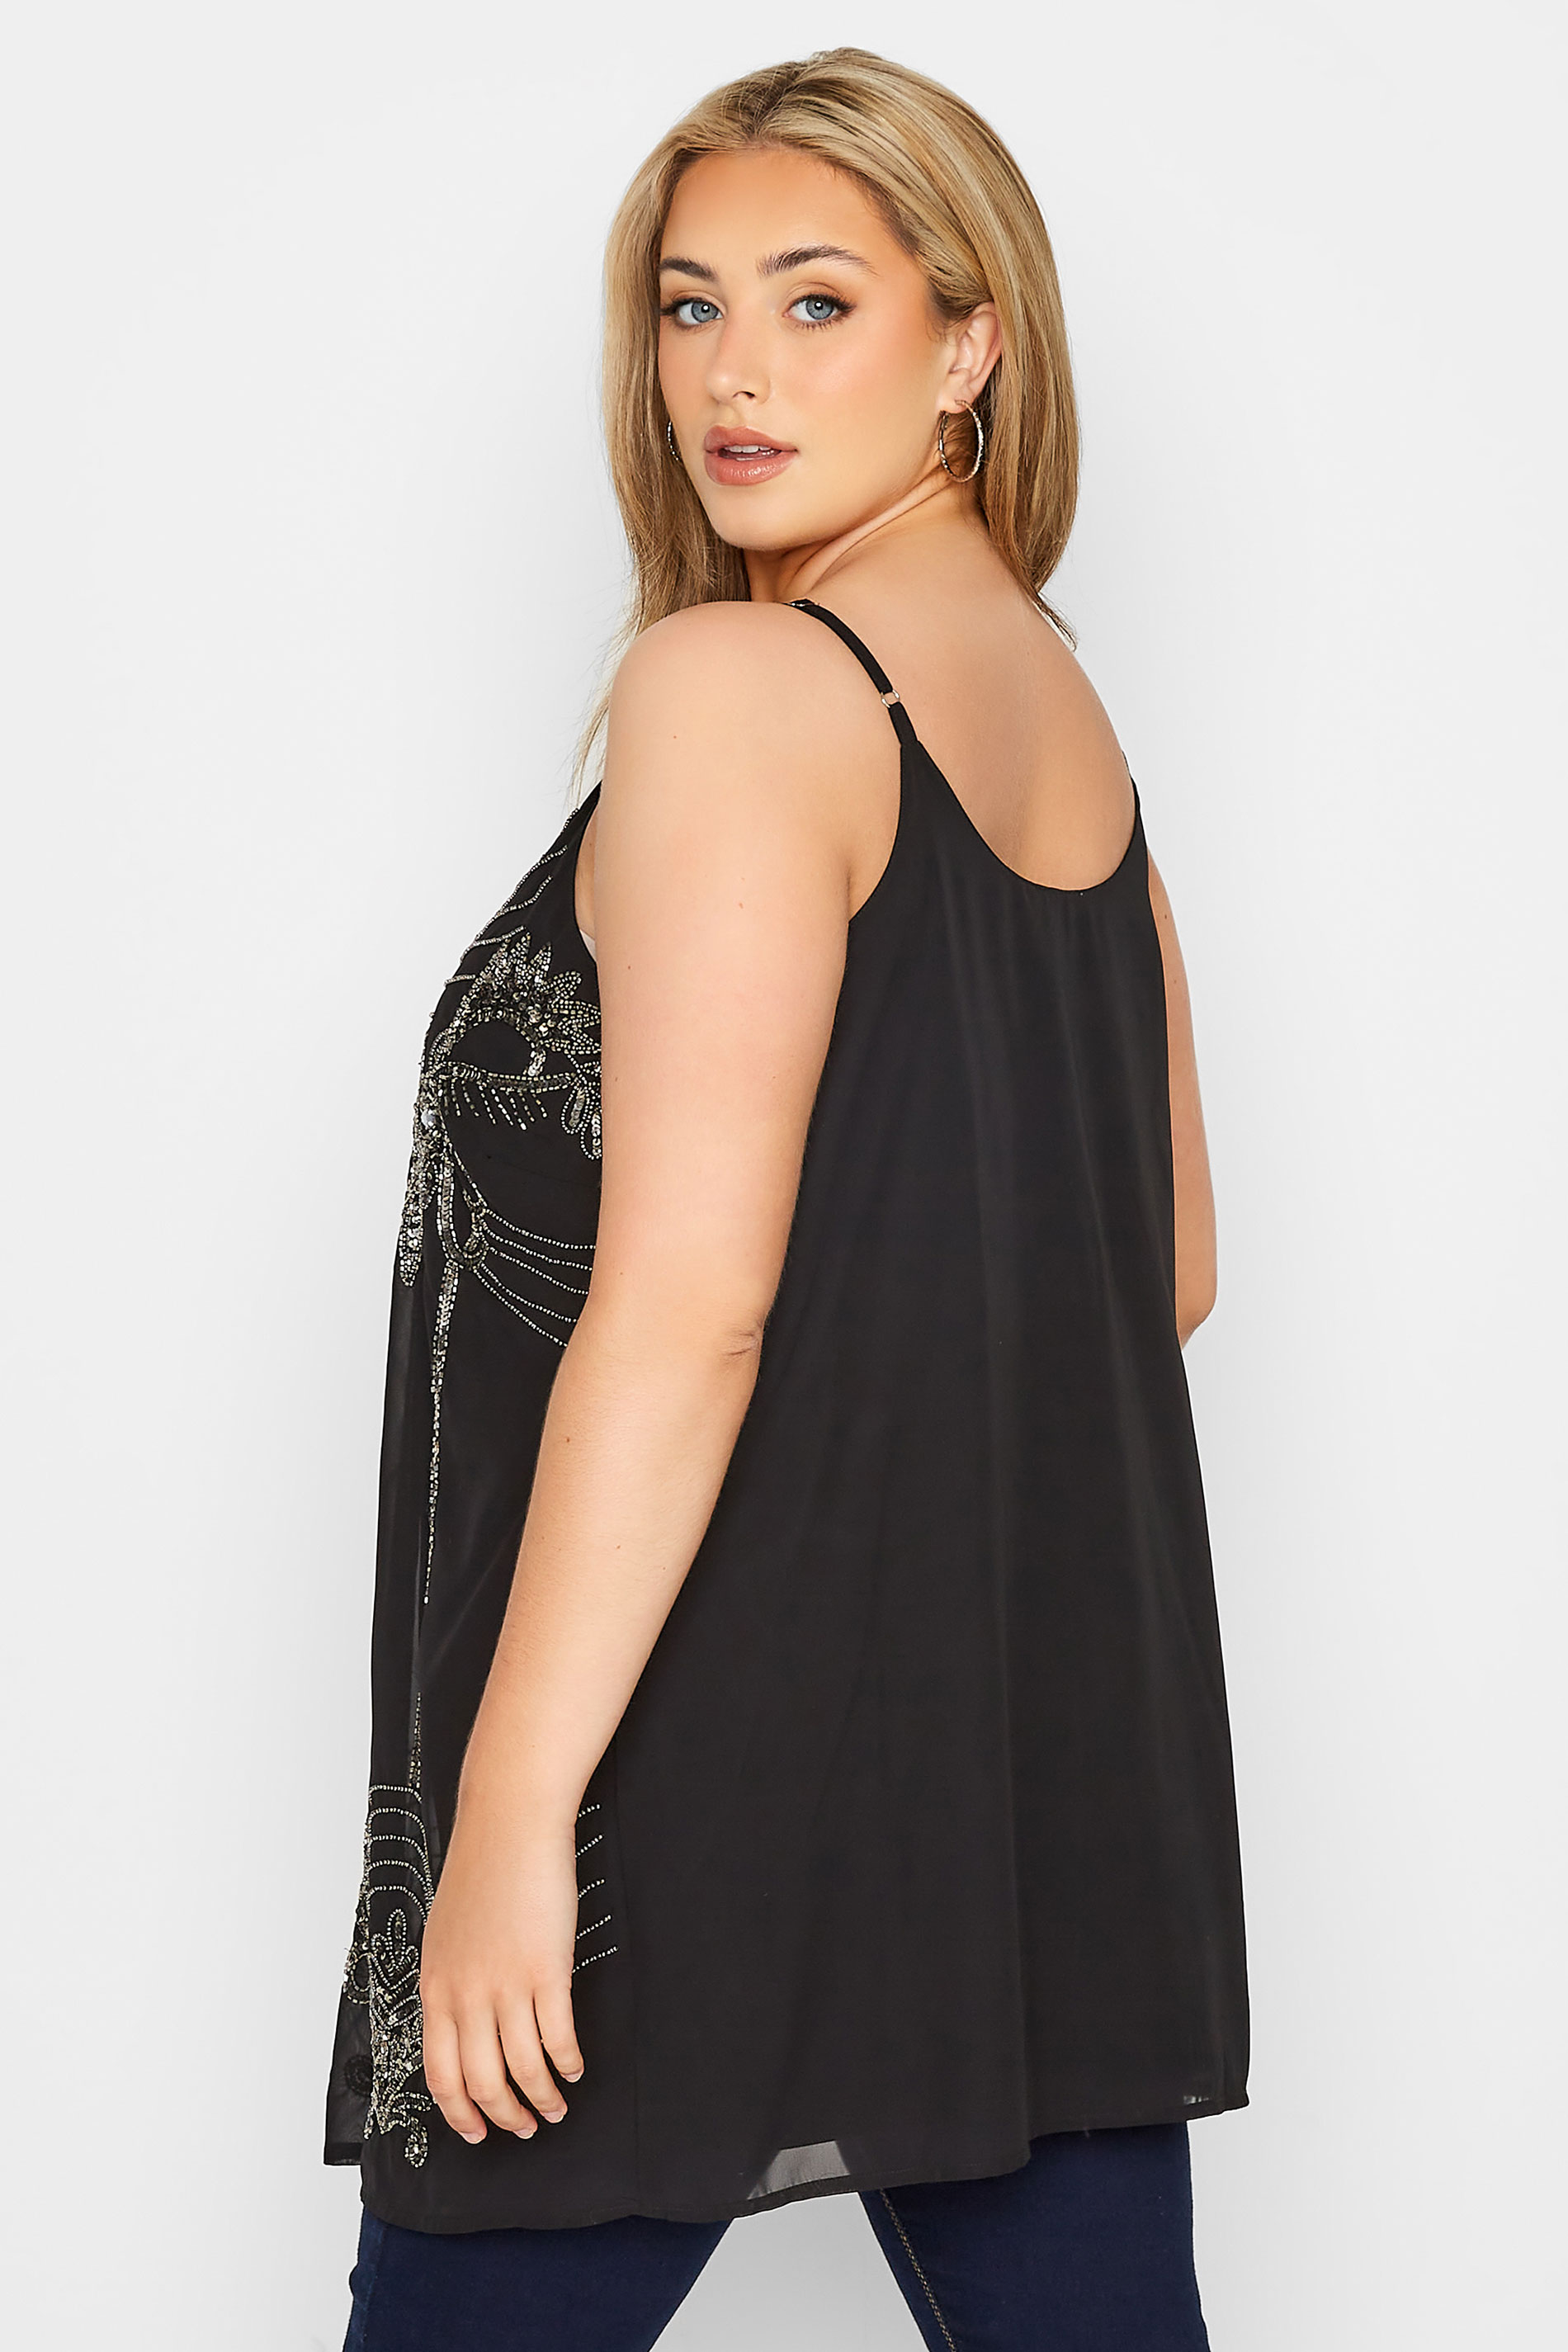 Plus Size LUXE Black Paisley Sequin Hand Embellished Cami Top | Yours Clothing 2